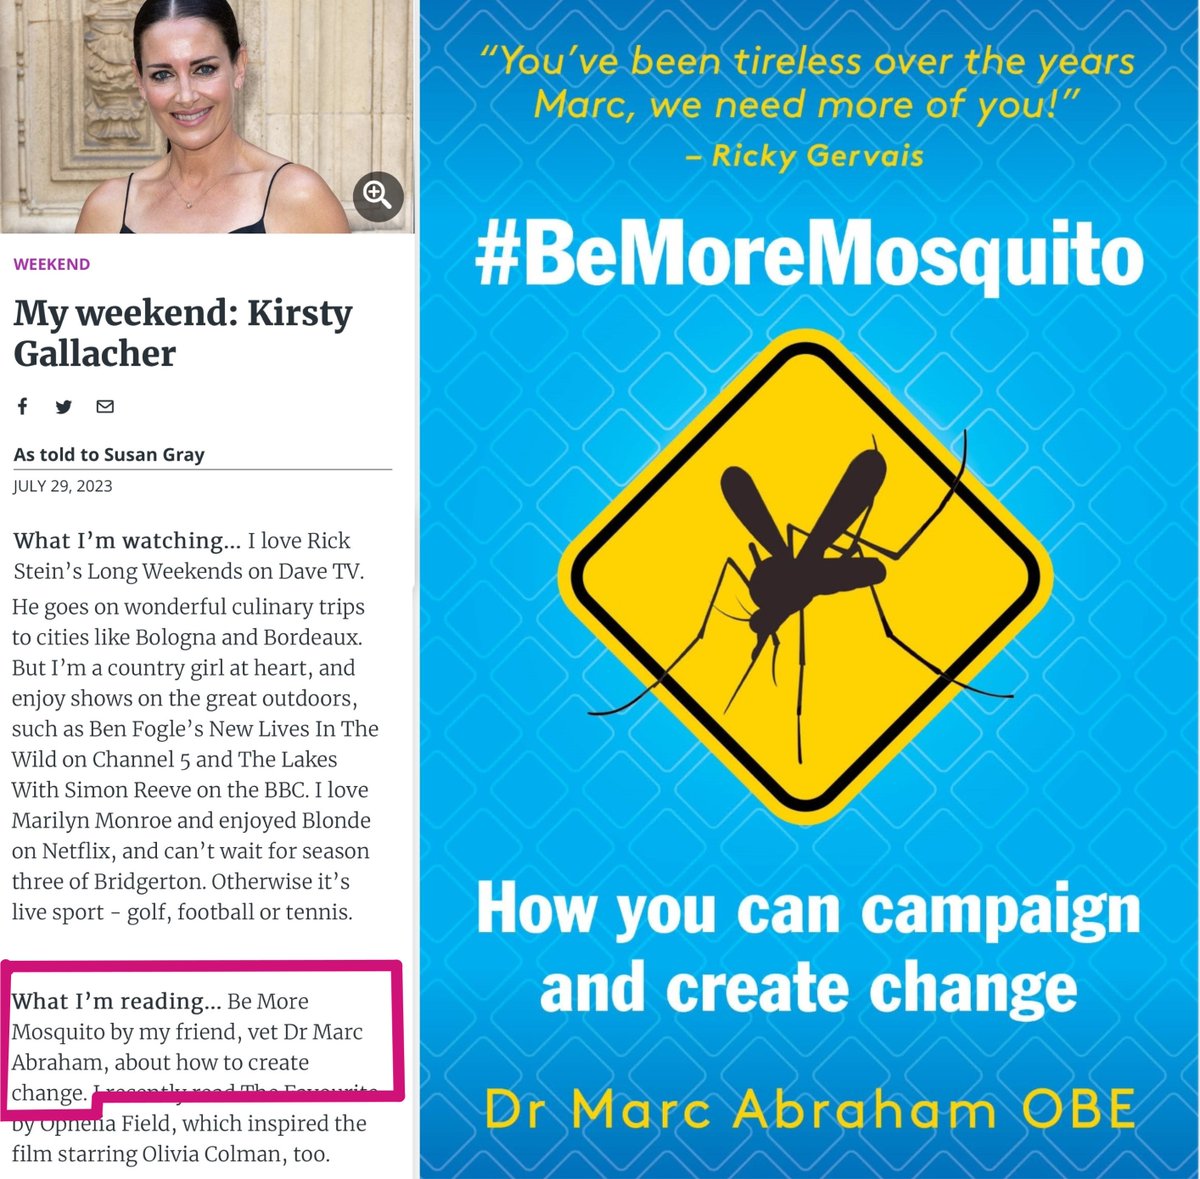 Thanks to lovely friend @TheRealKirstyG for mentioning my latest book in her recent @weekendmagazine article. Please do consider reading this if there's something you care about enough to want to change. We can all do something to help make a positive difference. #BeMoreMosquito